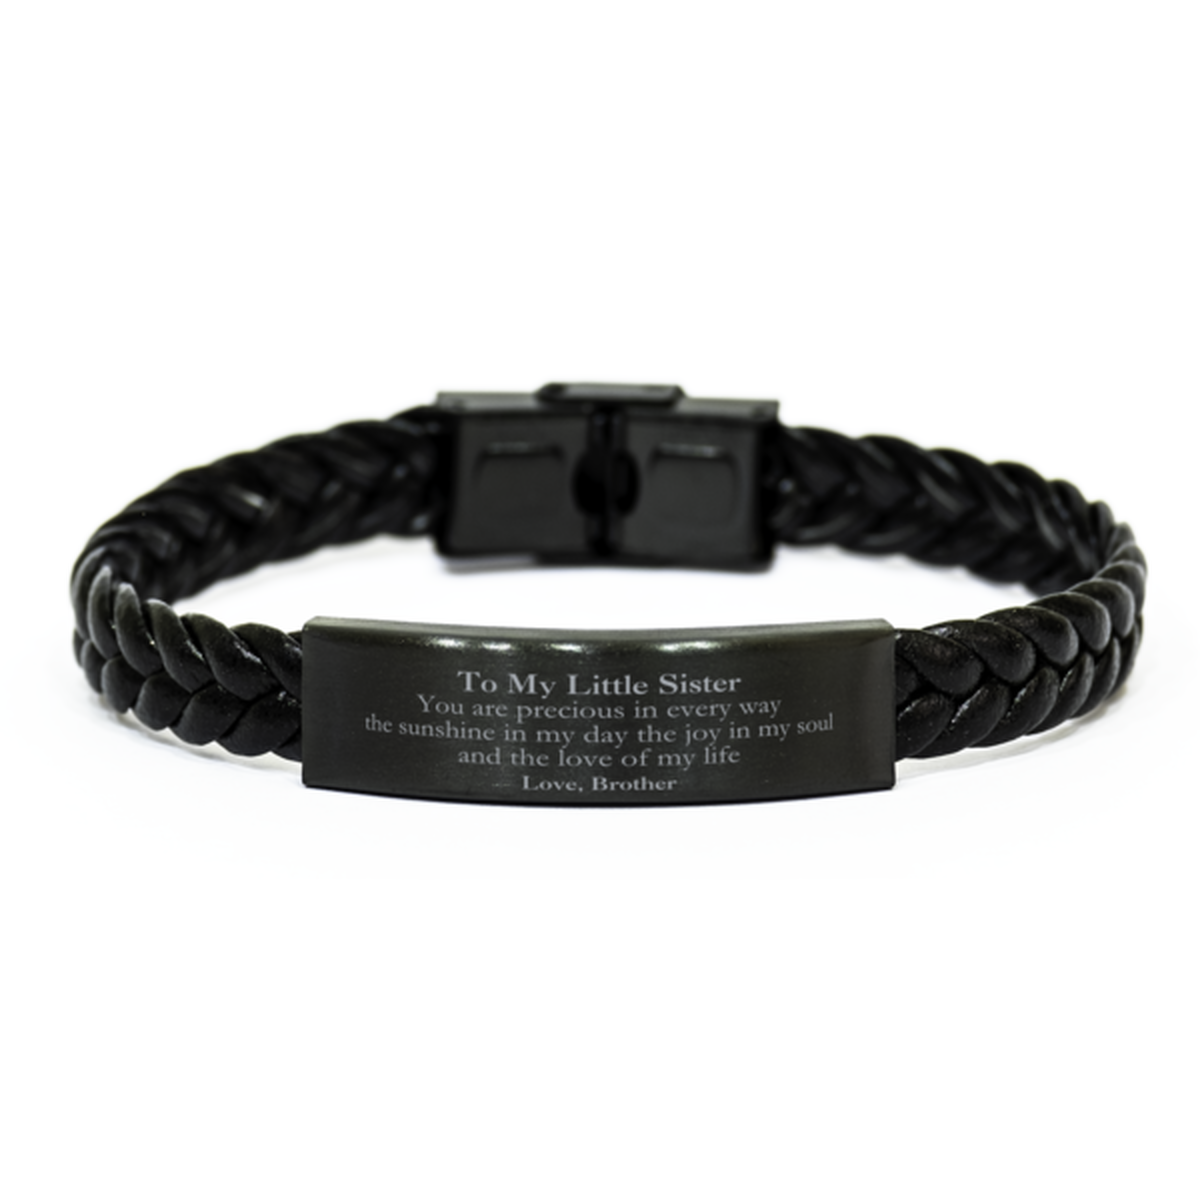 Graduation Gifts for Little Sister Braided Leather Bracelet Present from Brother, Christmas Little Sister Birthday Gifts Little Sister You are precious in every way the sunshine in my day. Love, Brother